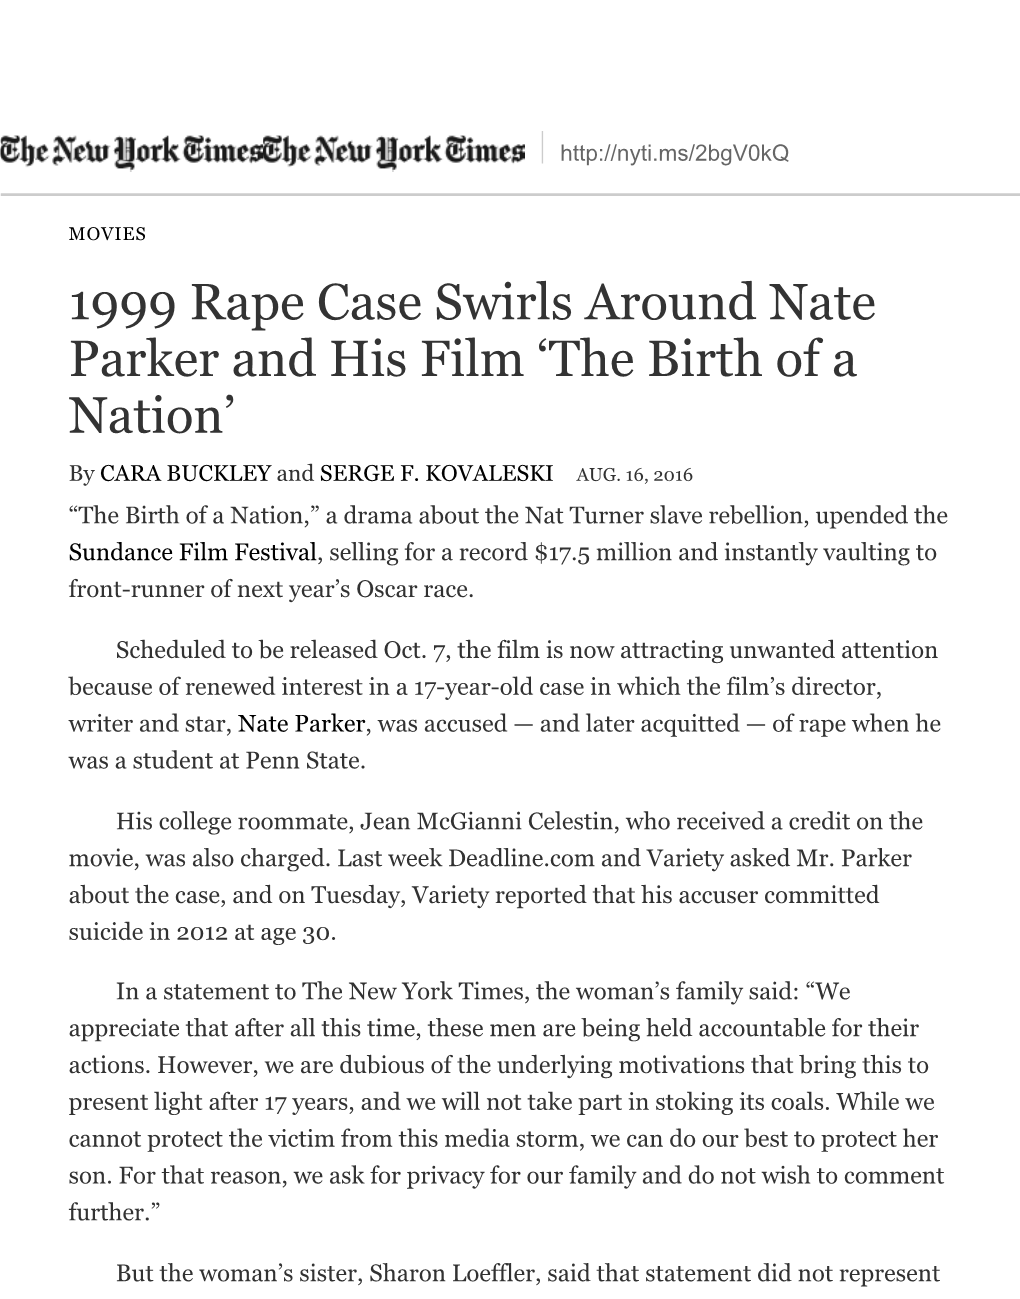 1999 Rape Case Swirls Around Nate Parker and His Film ‘The Birth of a Nation’